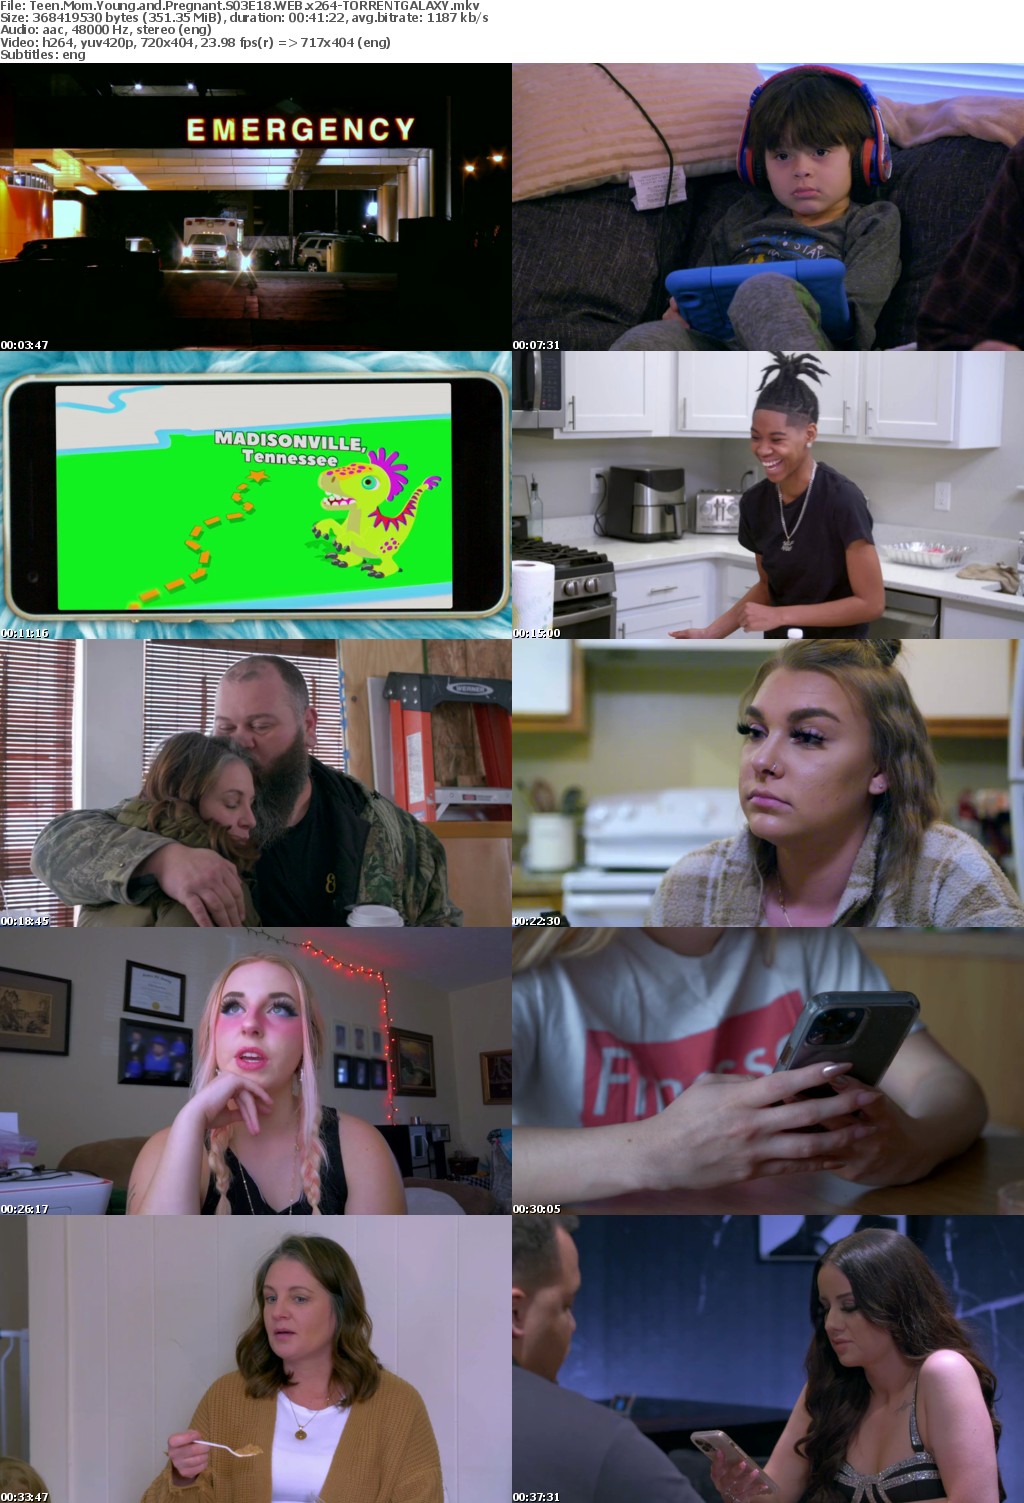 Teen Mom Young and Pregnant S03E18 WEB x264-GALAXY